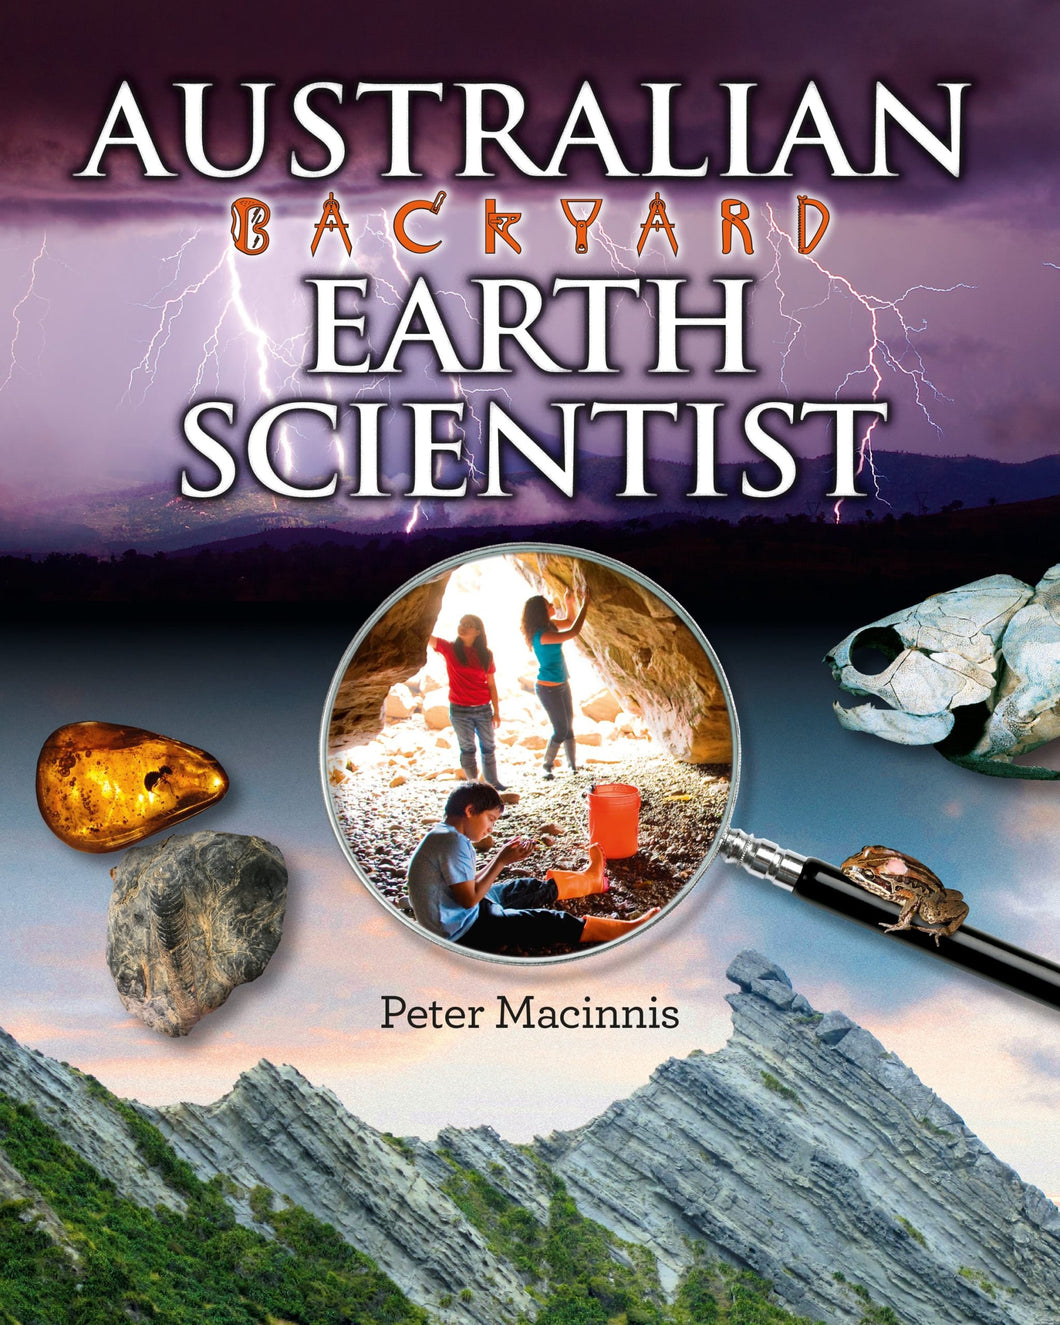 Children‘s book of earth sciences with magnifying glass and fossils on cover.